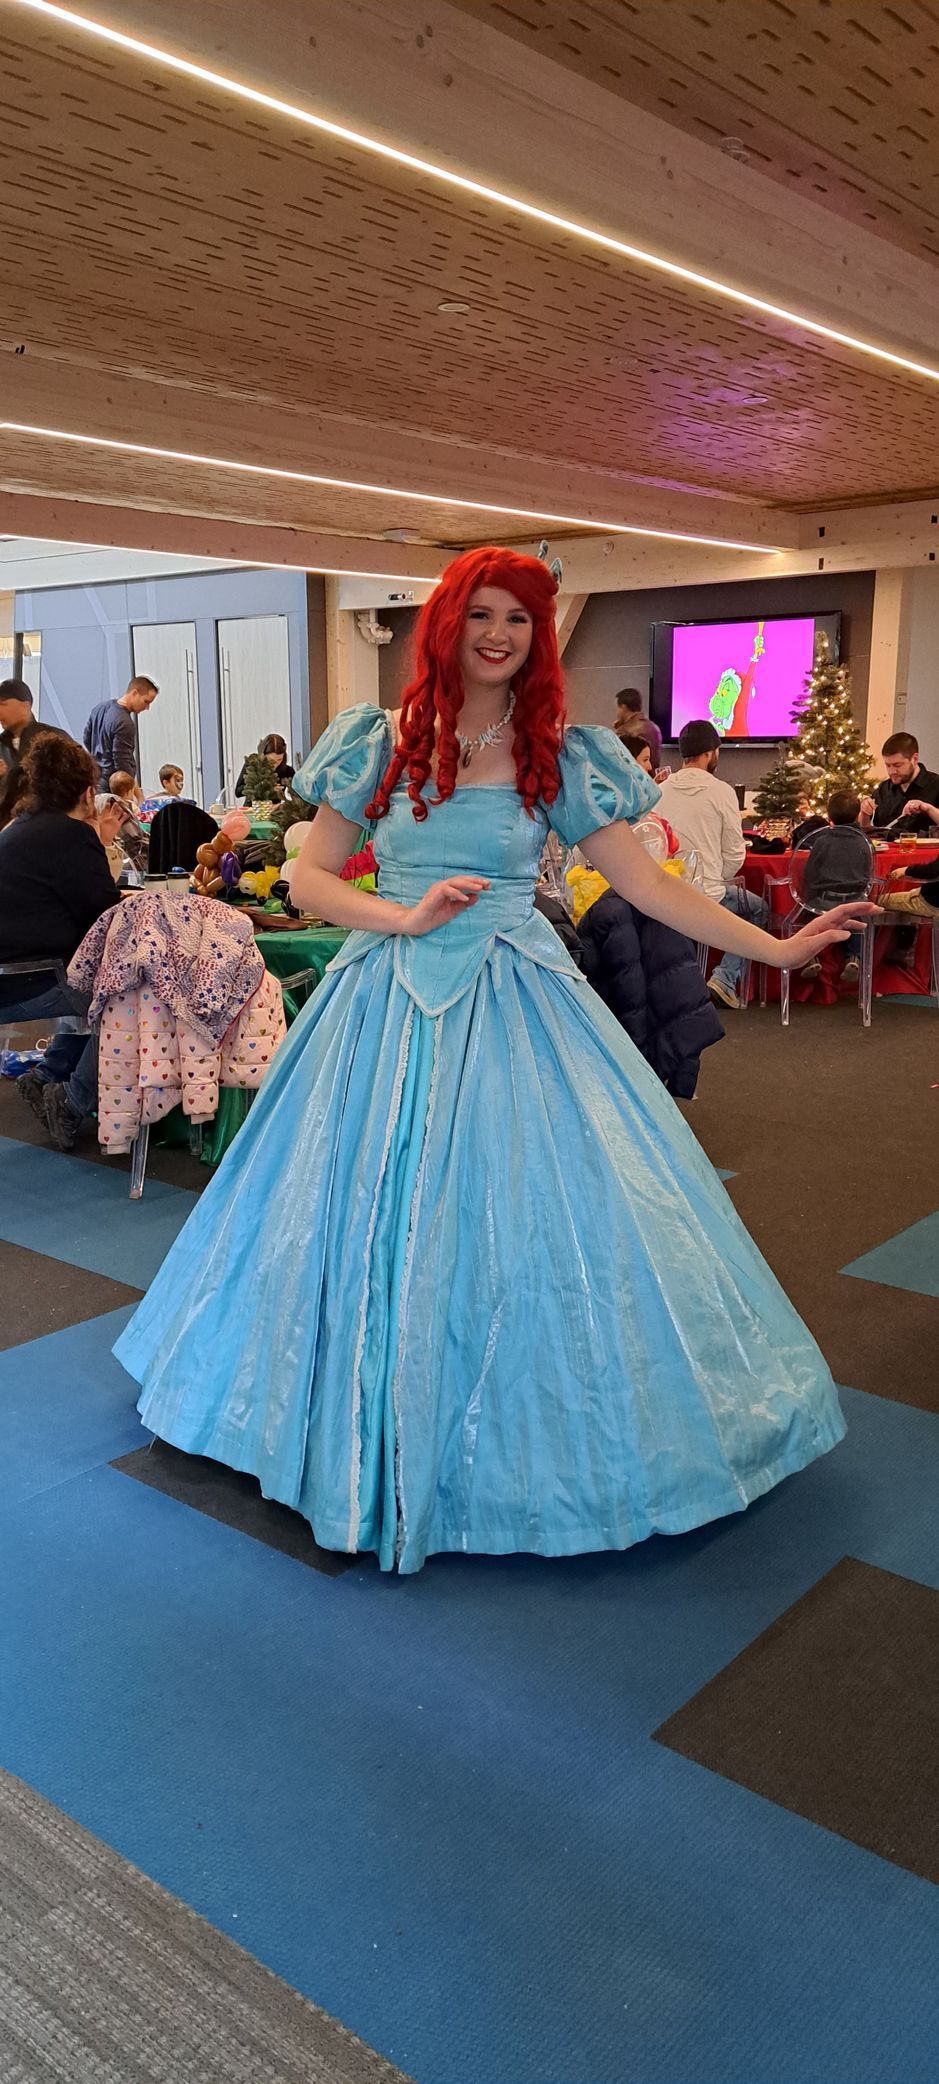 Princess as interactive entertainment at children's party